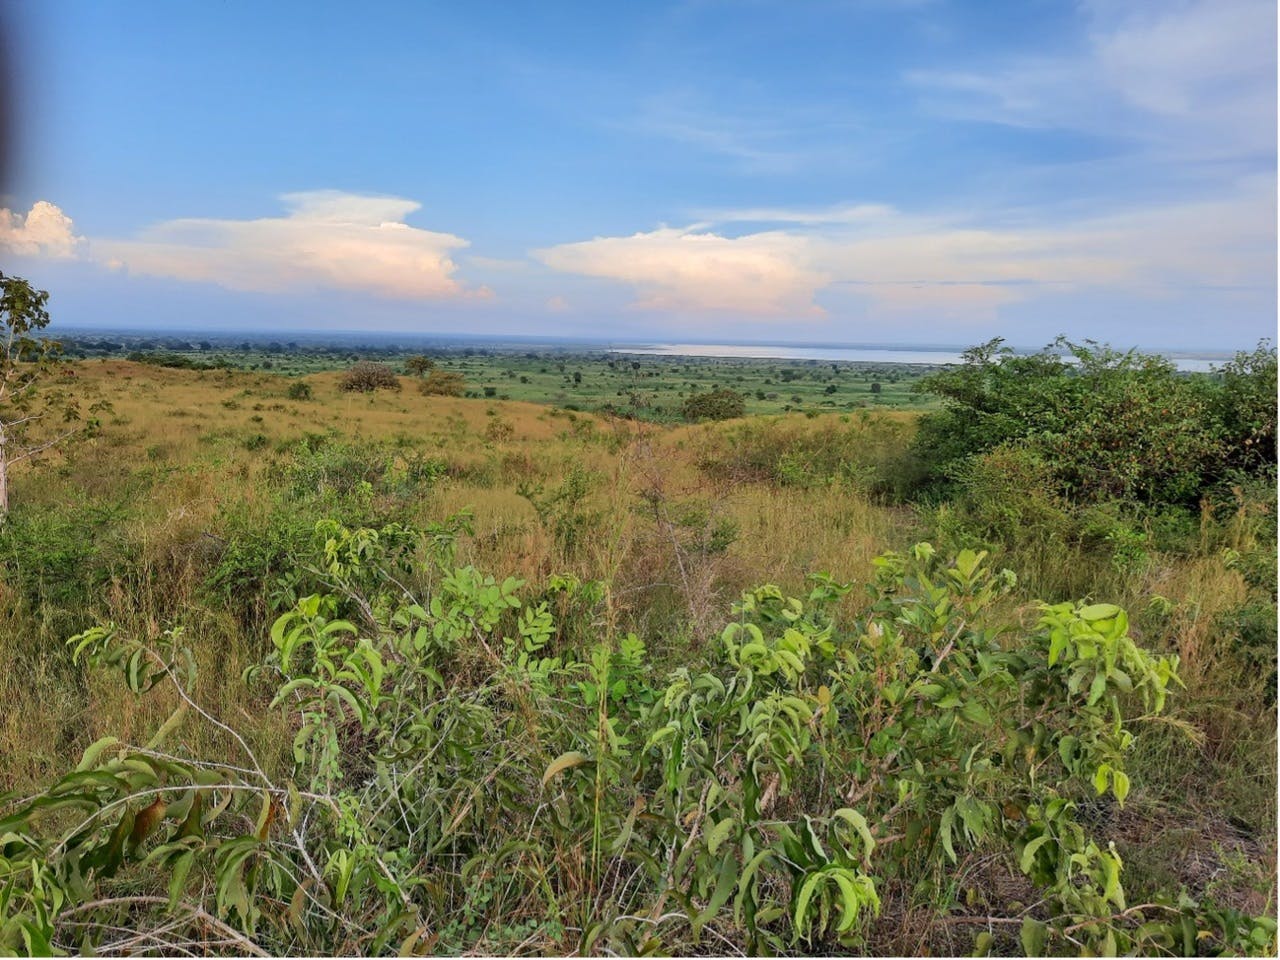 Land acquisition in Murchison Falls Conservation Areas helps protect endangered species in Uganda